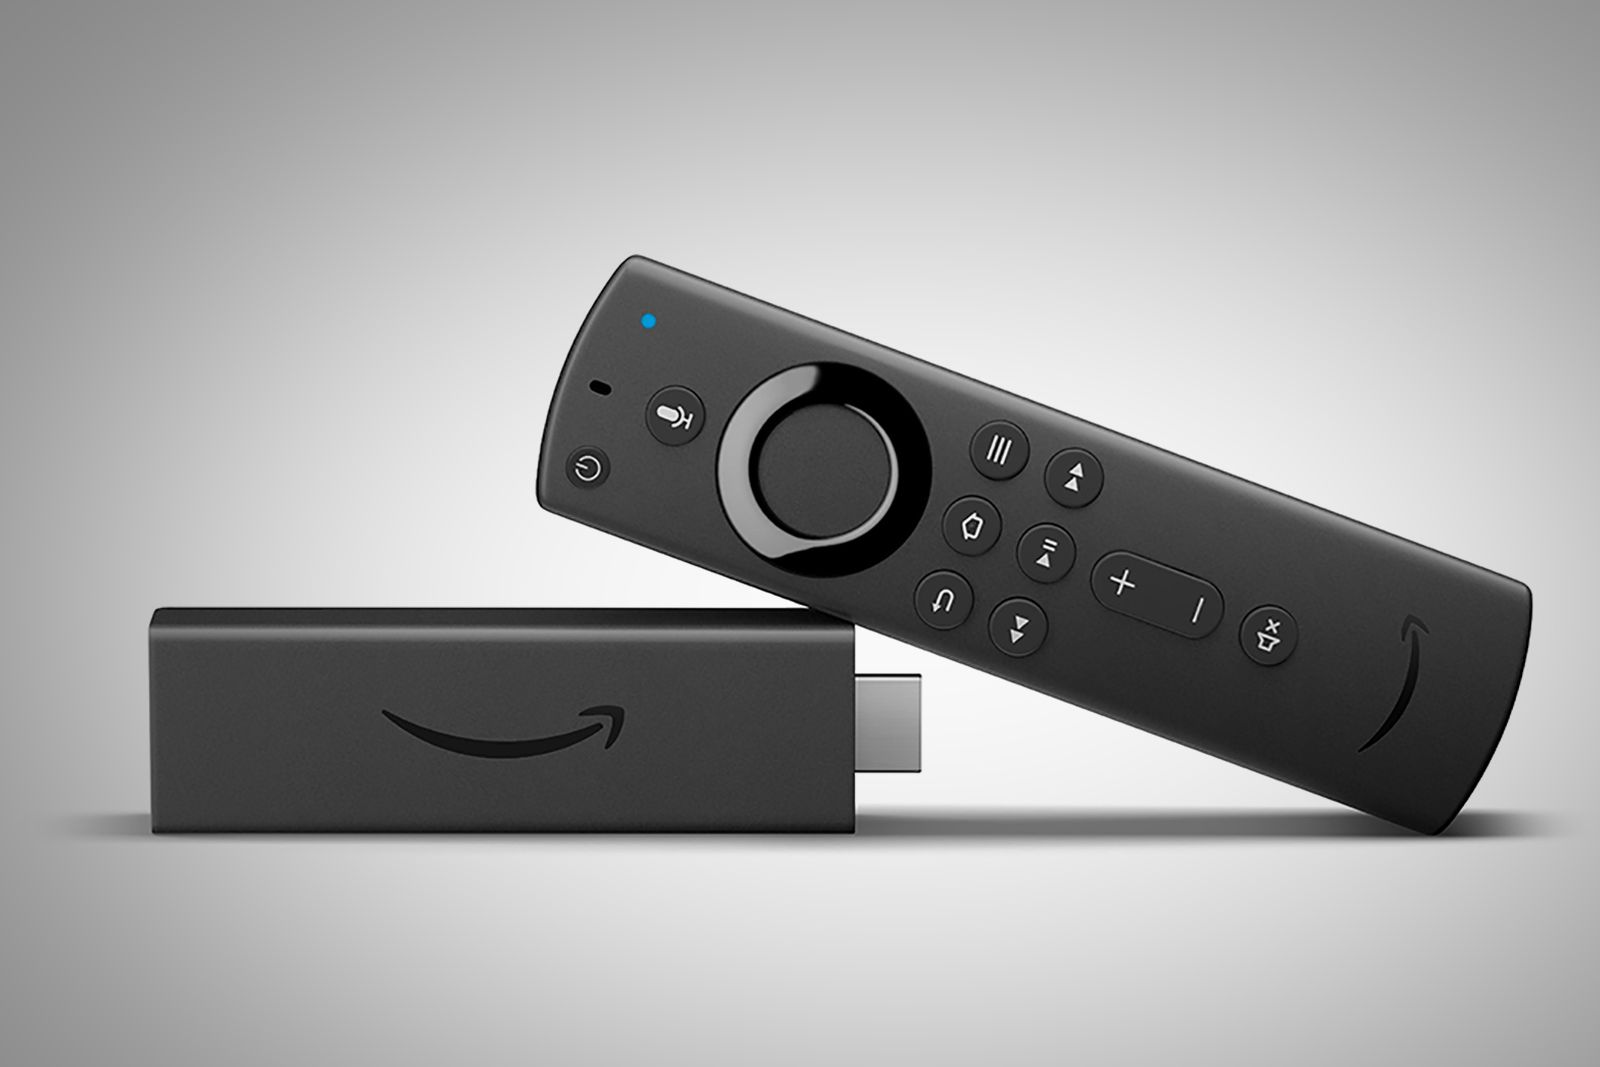 Amazon updates its Fire TV Stick with support for 4K and more image 1